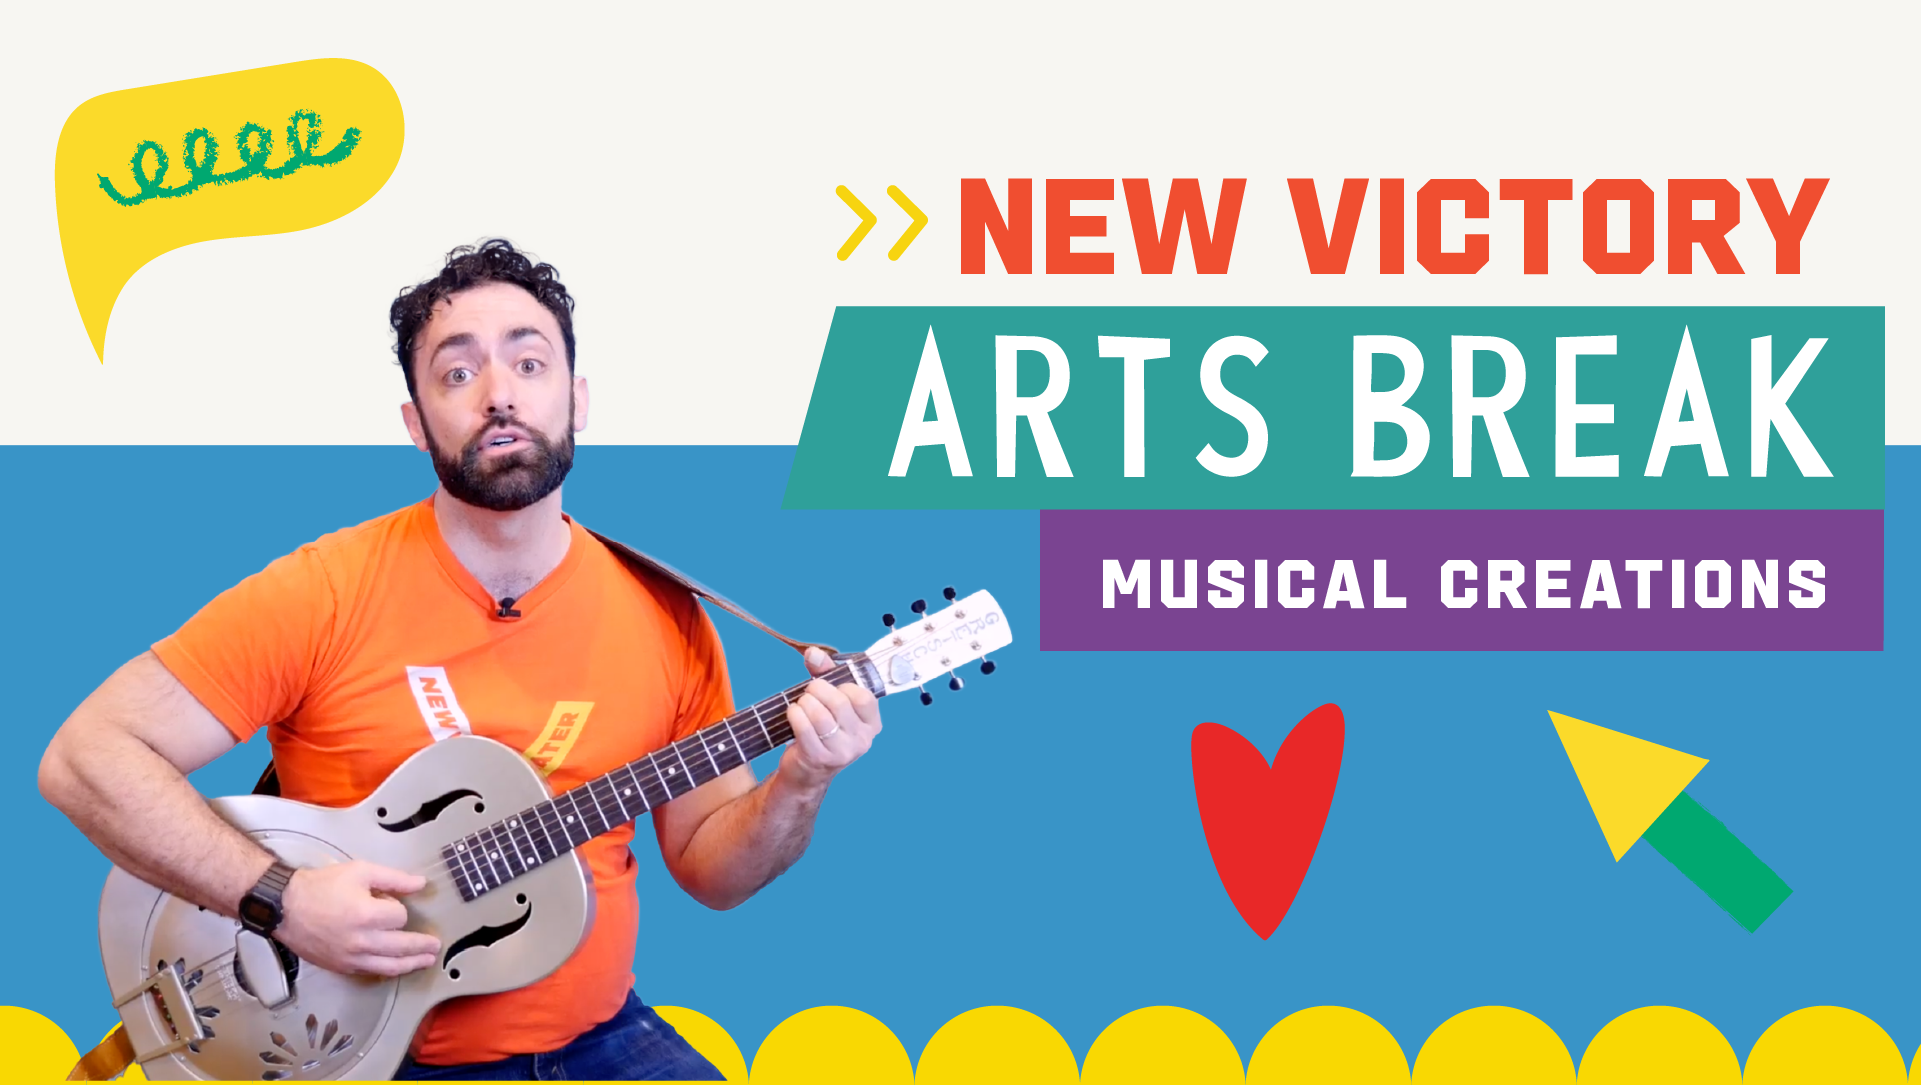 A New Victory Teaching Artists playing guitar with text, "New Victory Arts Break Musical Creations."